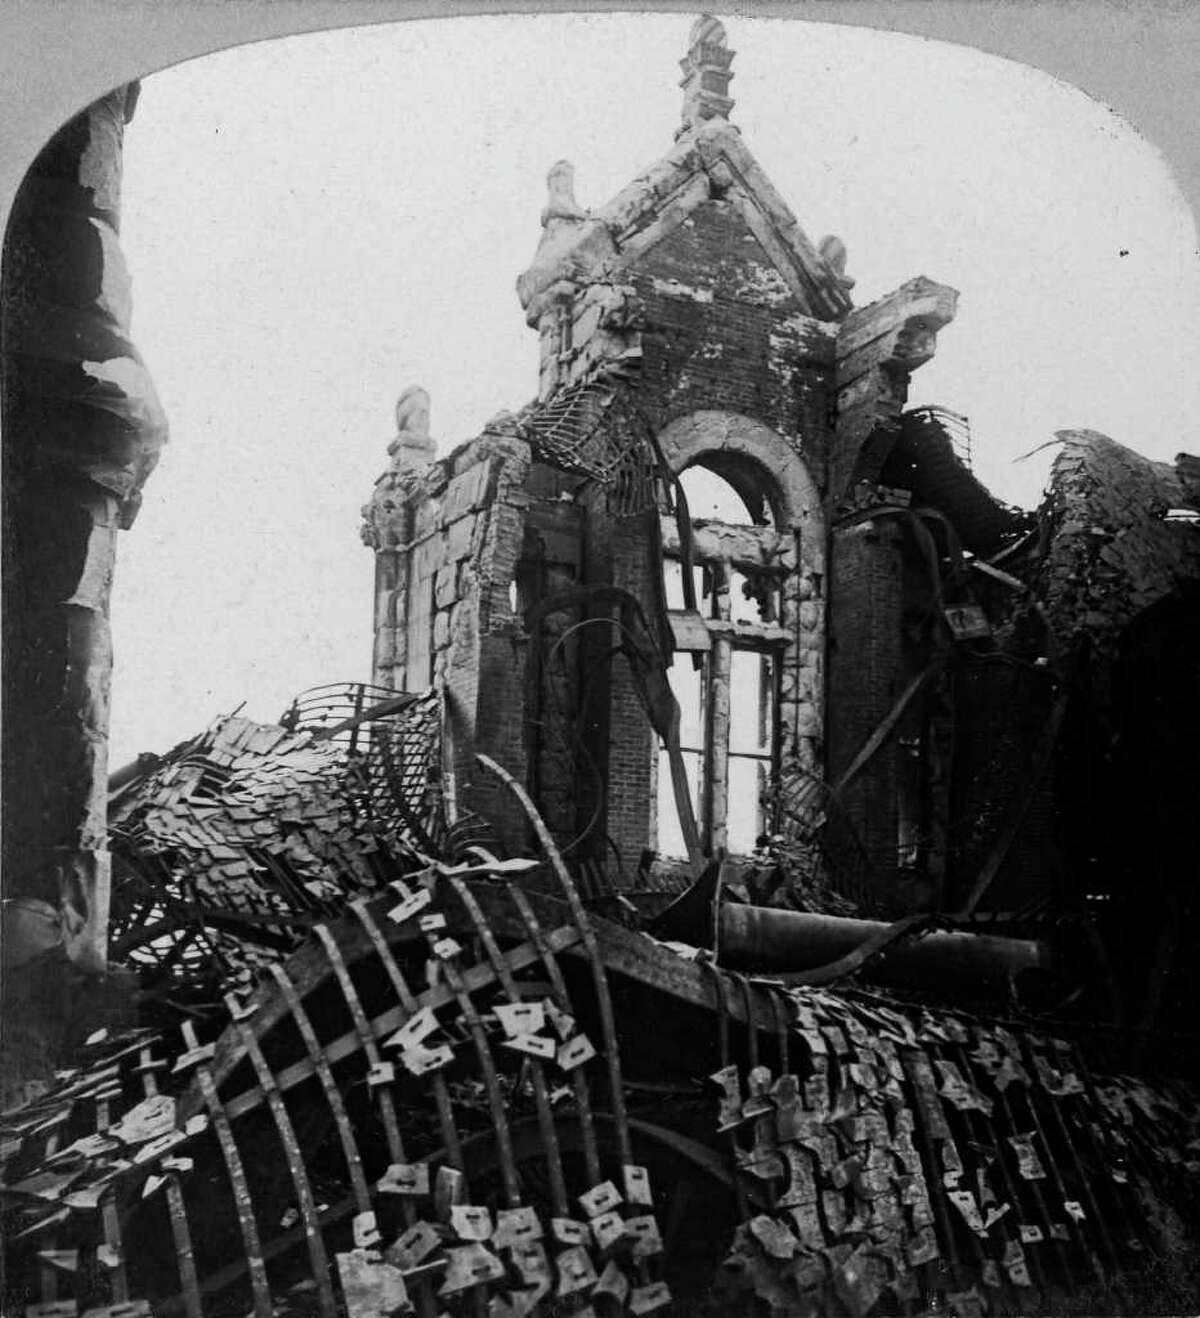 Aftermath of the March 29, 1911 State Capitol fire in Albany. (Courtesy NYS Library)